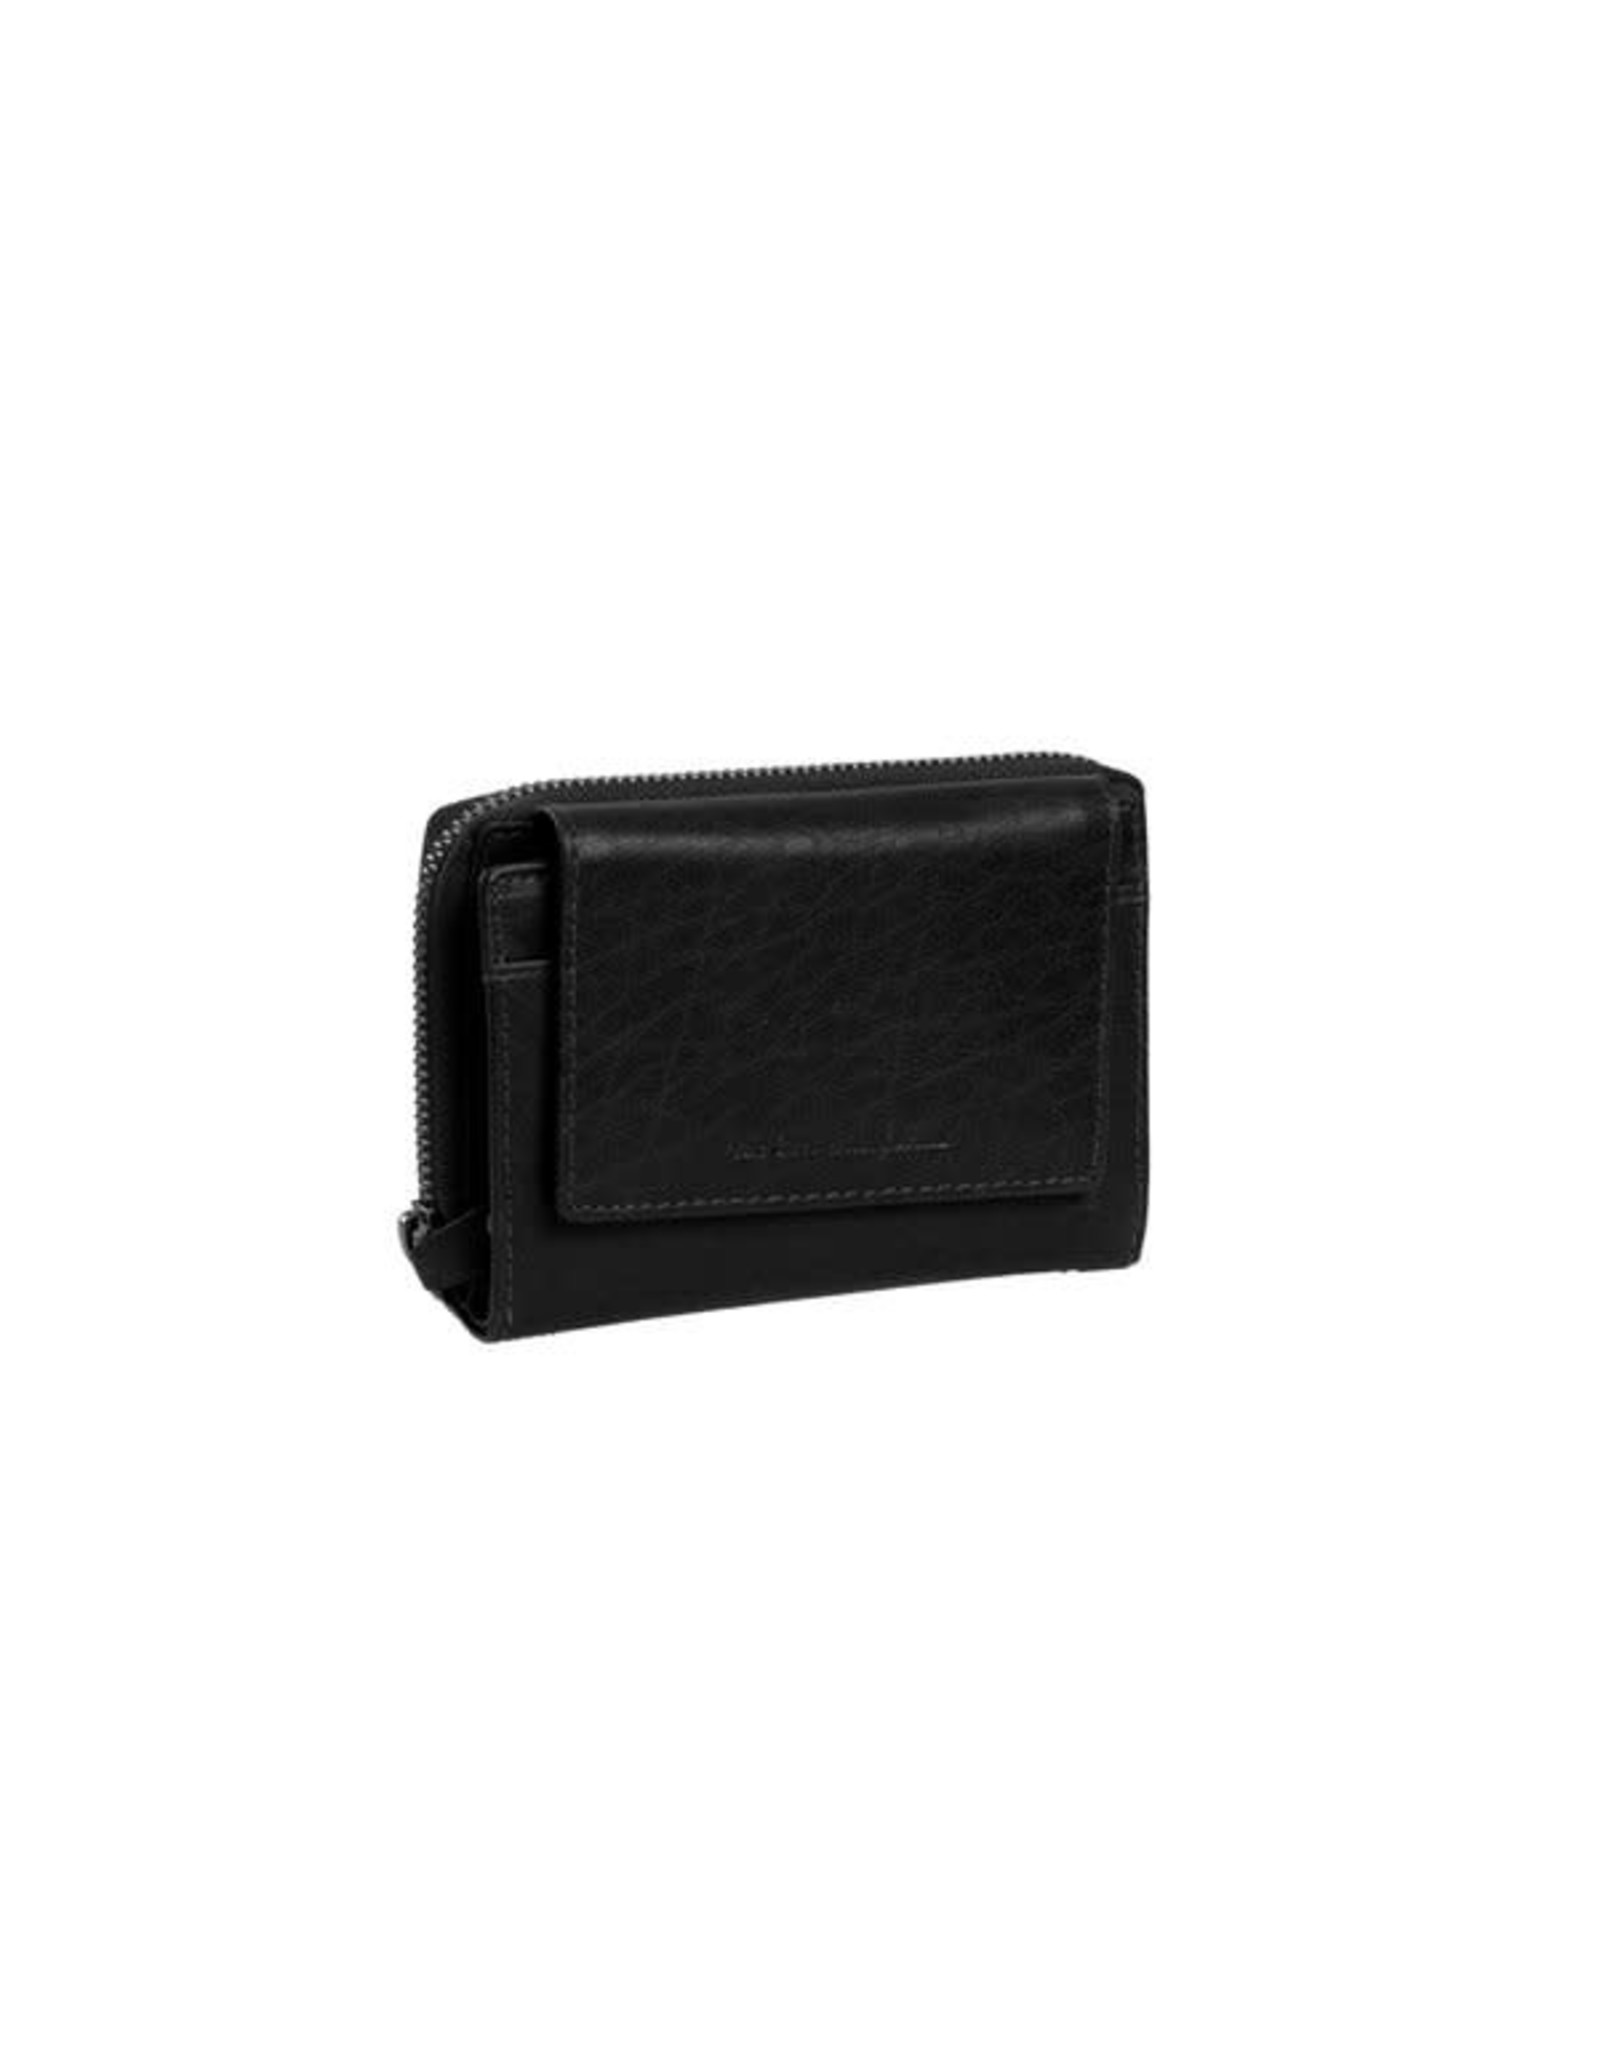 Chesterfield The Chesterfield Brand Ladies Wallet Hanoi